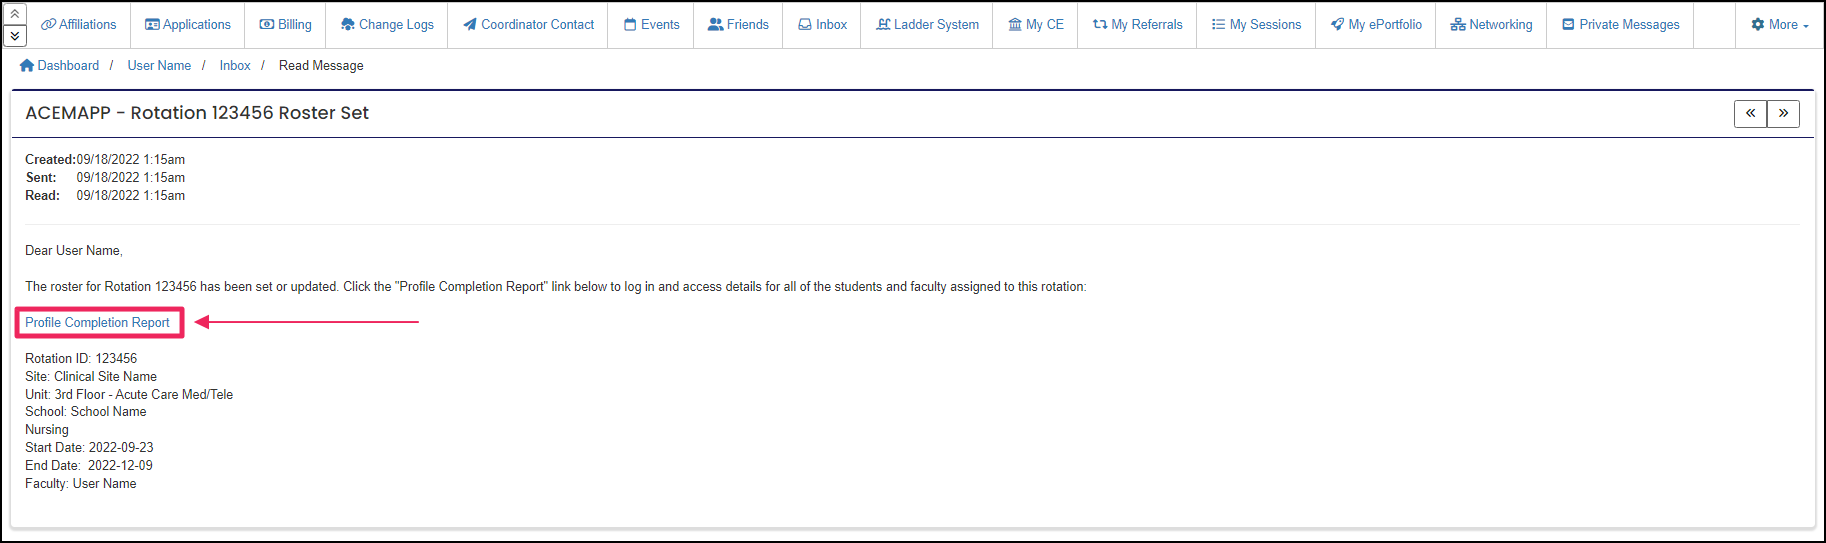 image shows email example for profile completion report